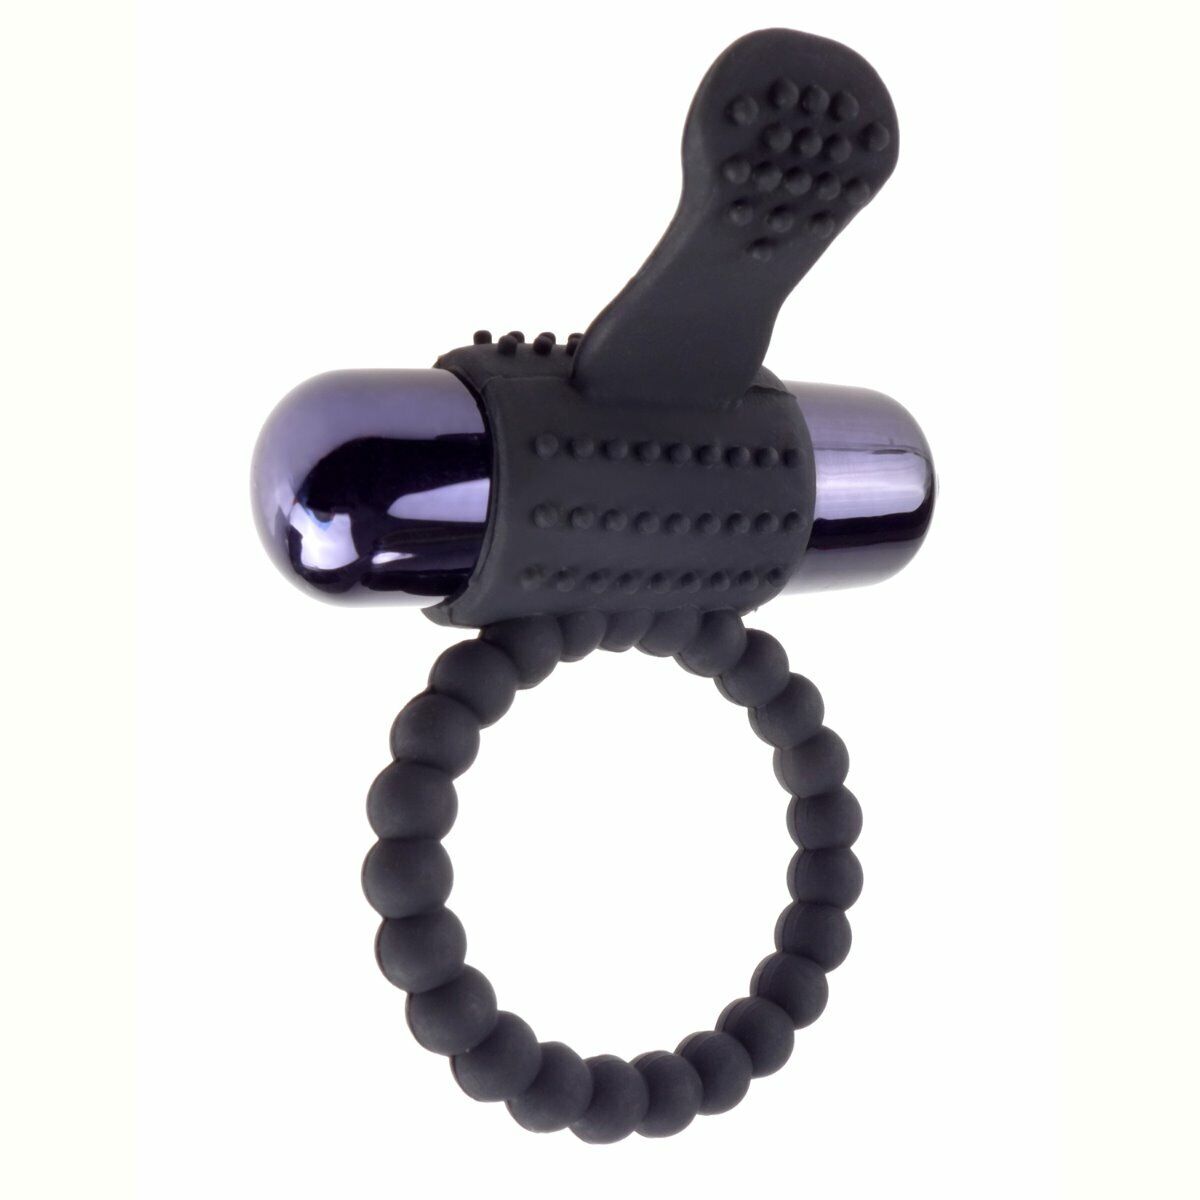 Silicone Vibrating Male Penis Erection Enhancer Cock Ring Sex-toys for Couples